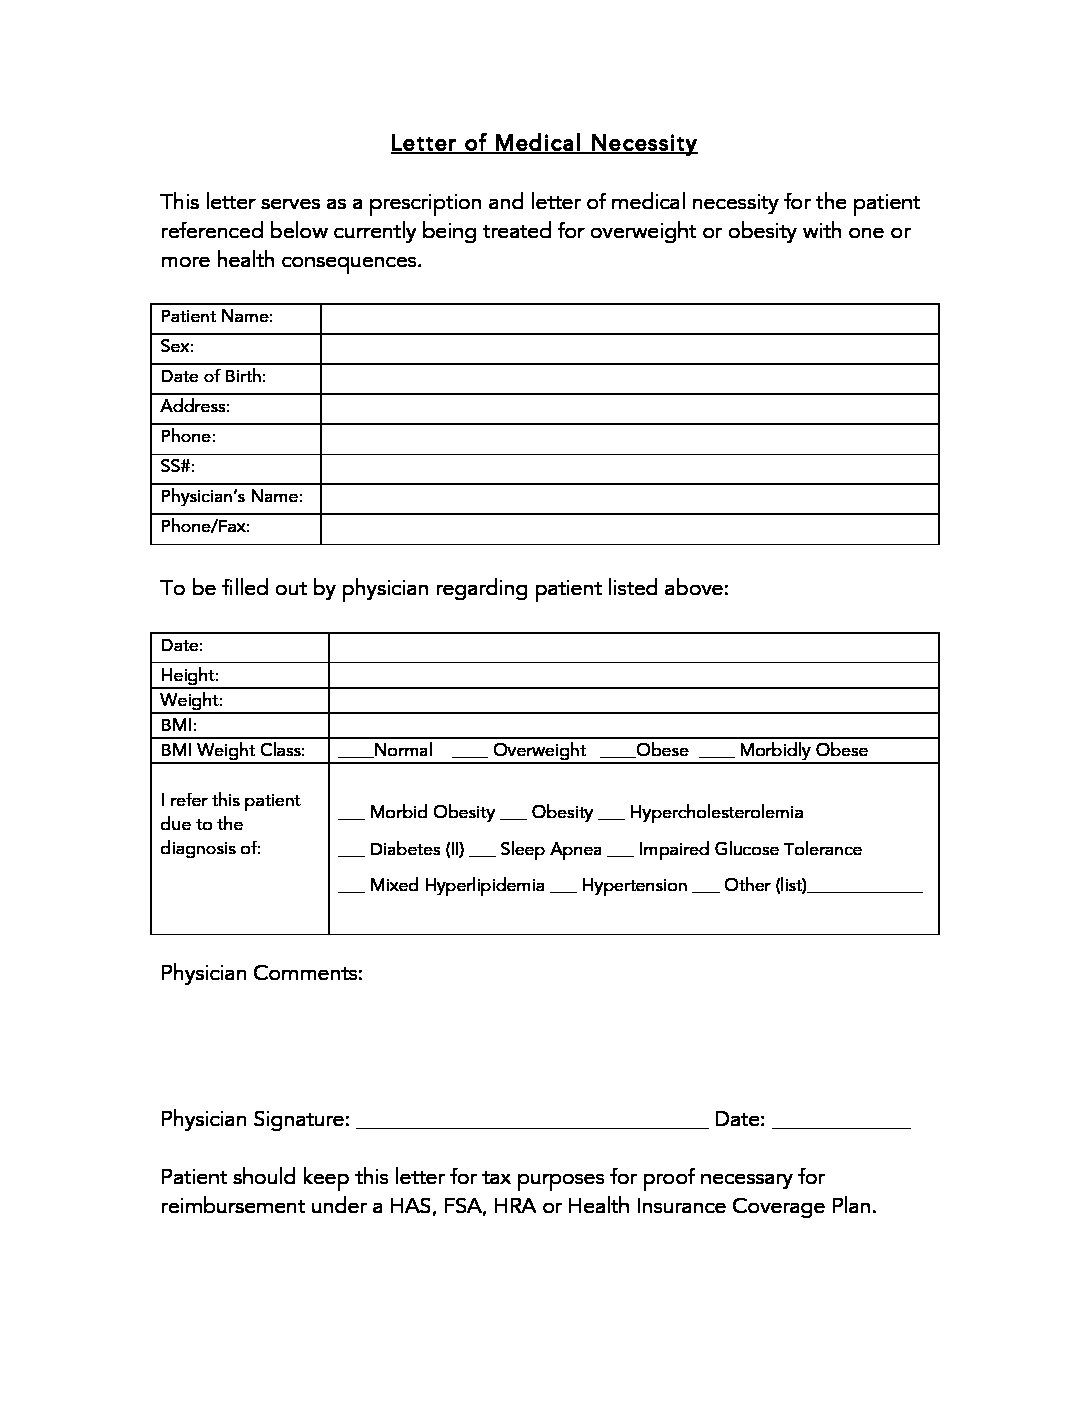 Letter Of Medical Necessity Form Template 6197